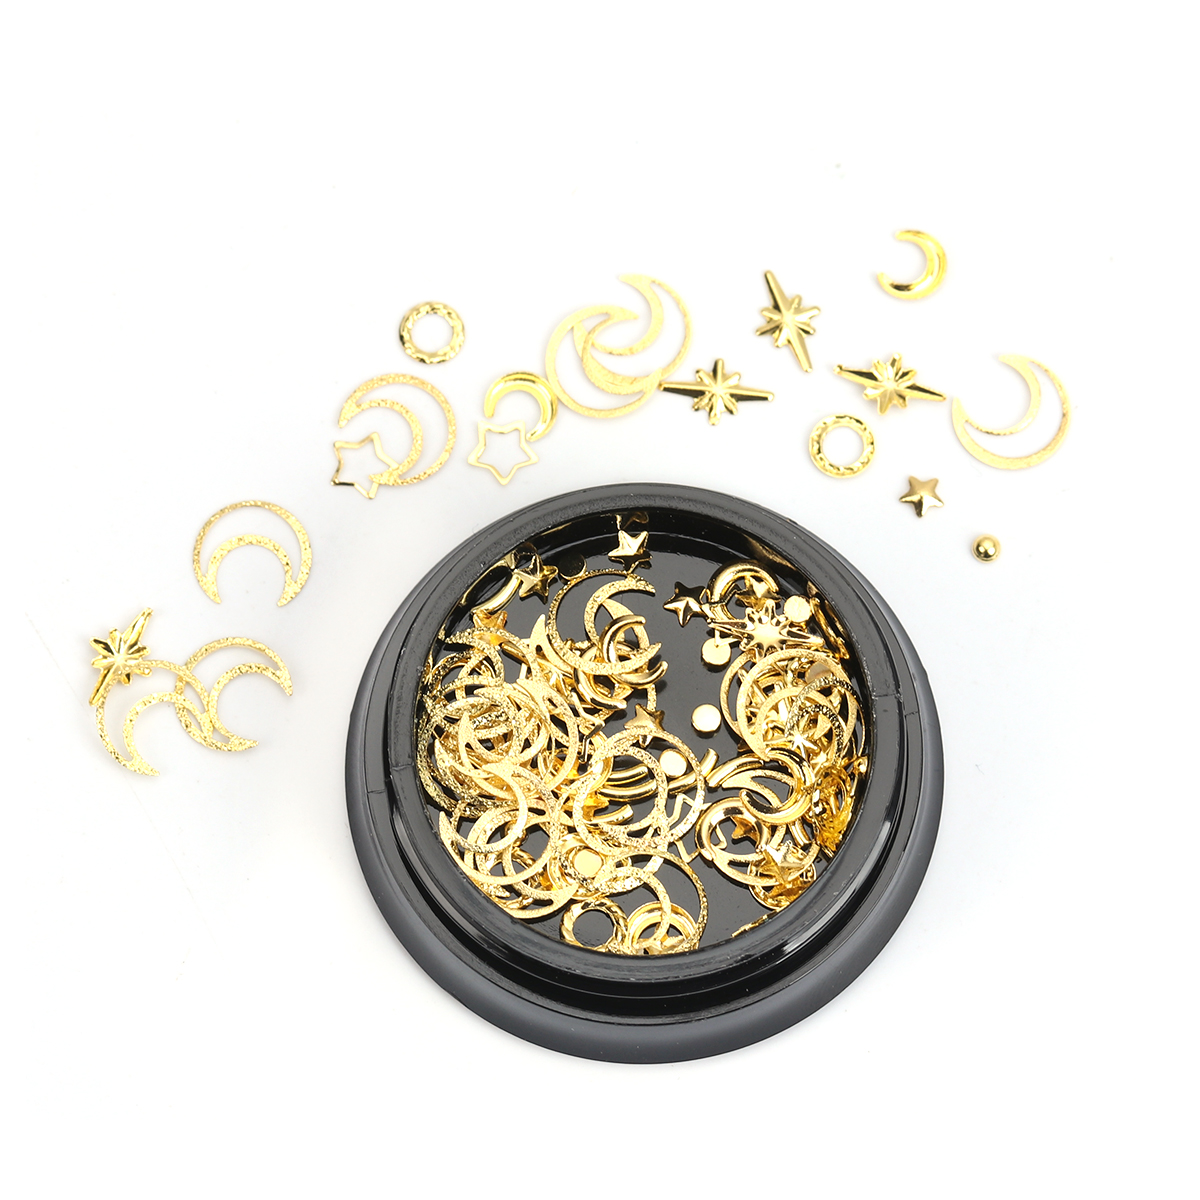 Picture of Zinc Based Alloy Resin Jewelry Craft Filling Material Gold Plated Round At Random 4cm Dia., 1 Piece